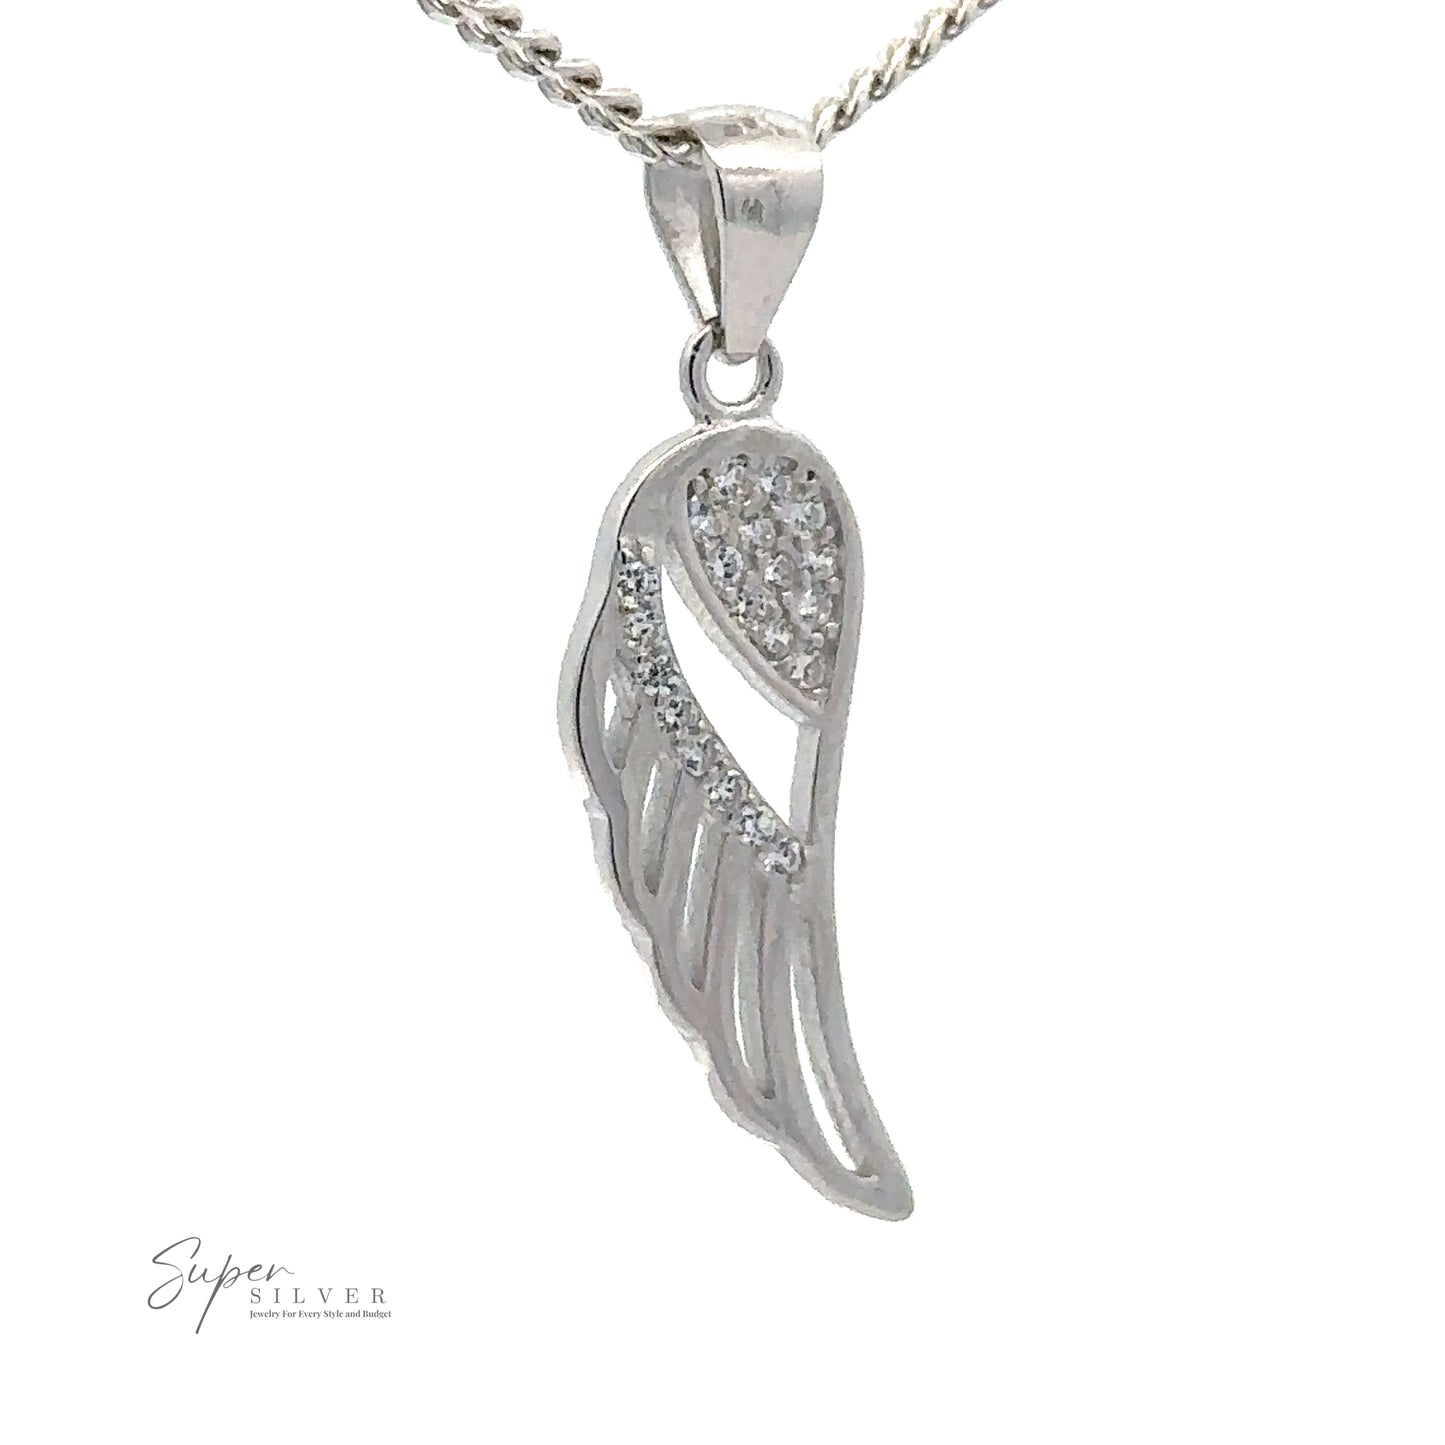 A Cubic Zirconia Feather Shaped Pendant, partially encrusted with cubic zirconia gemstones, displayed on a simple chain.